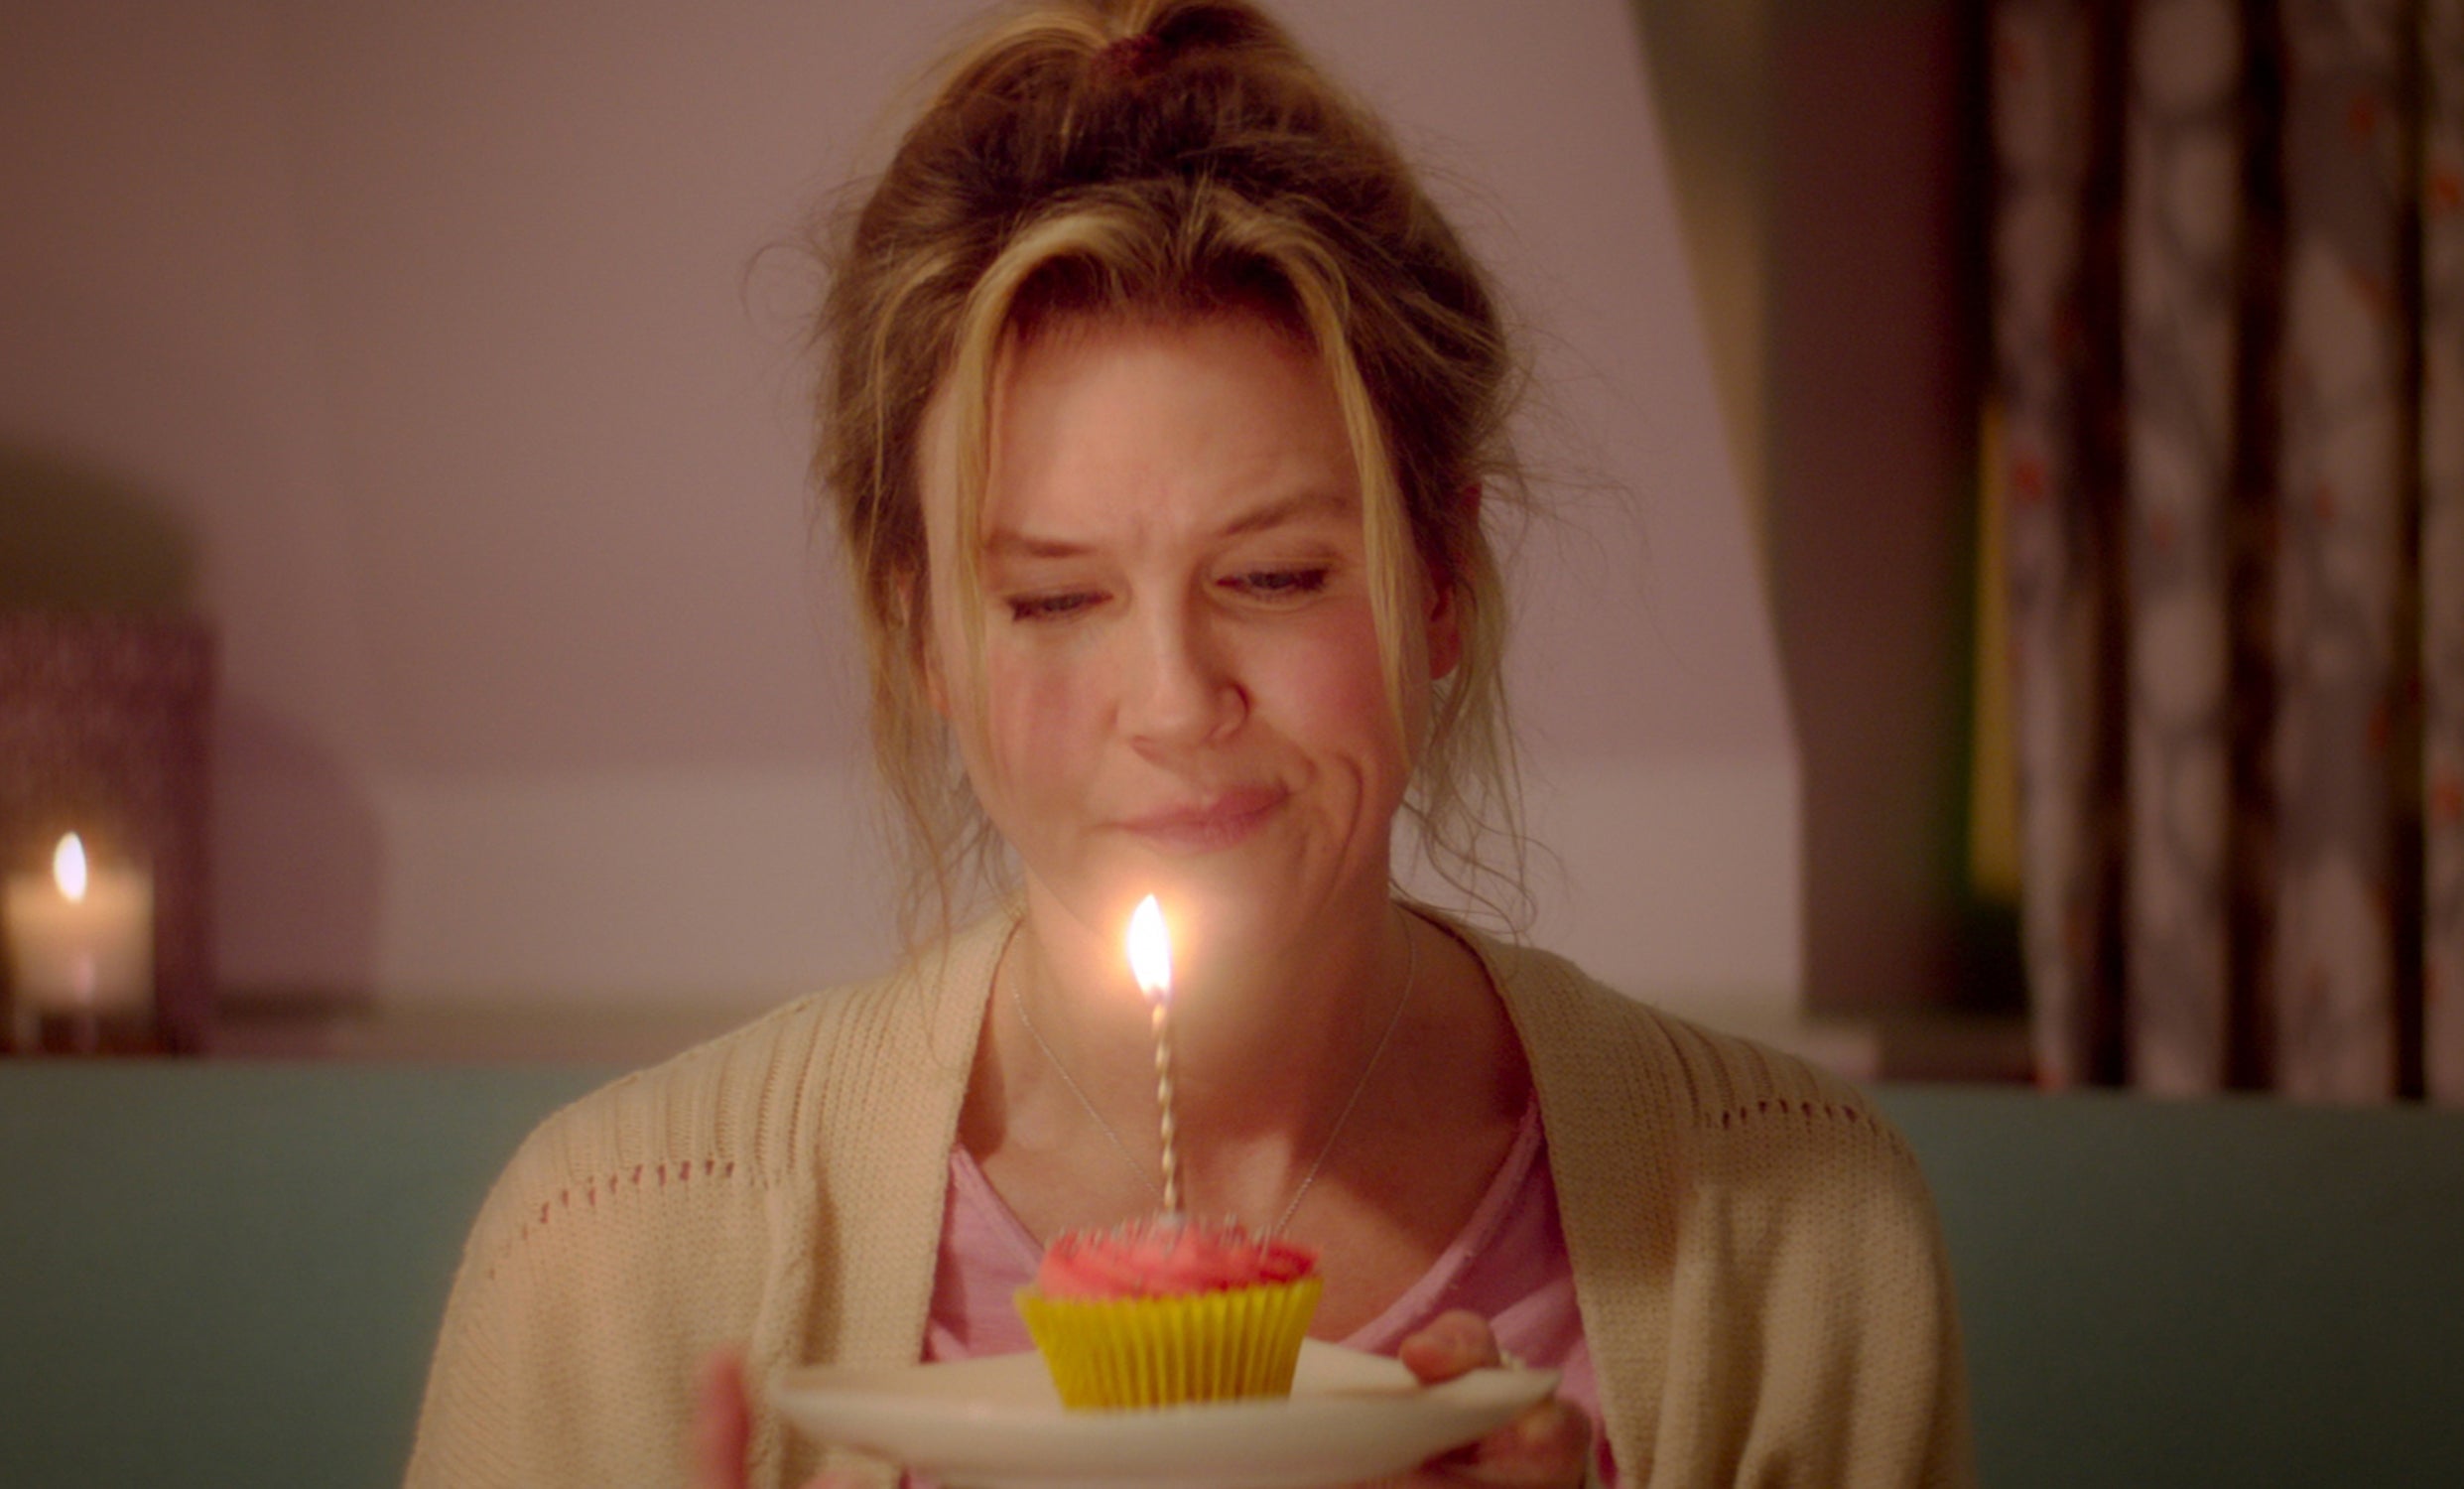 Renee Zellweger in a scene, holding a cupcake with a lit candle, appearing contemplative